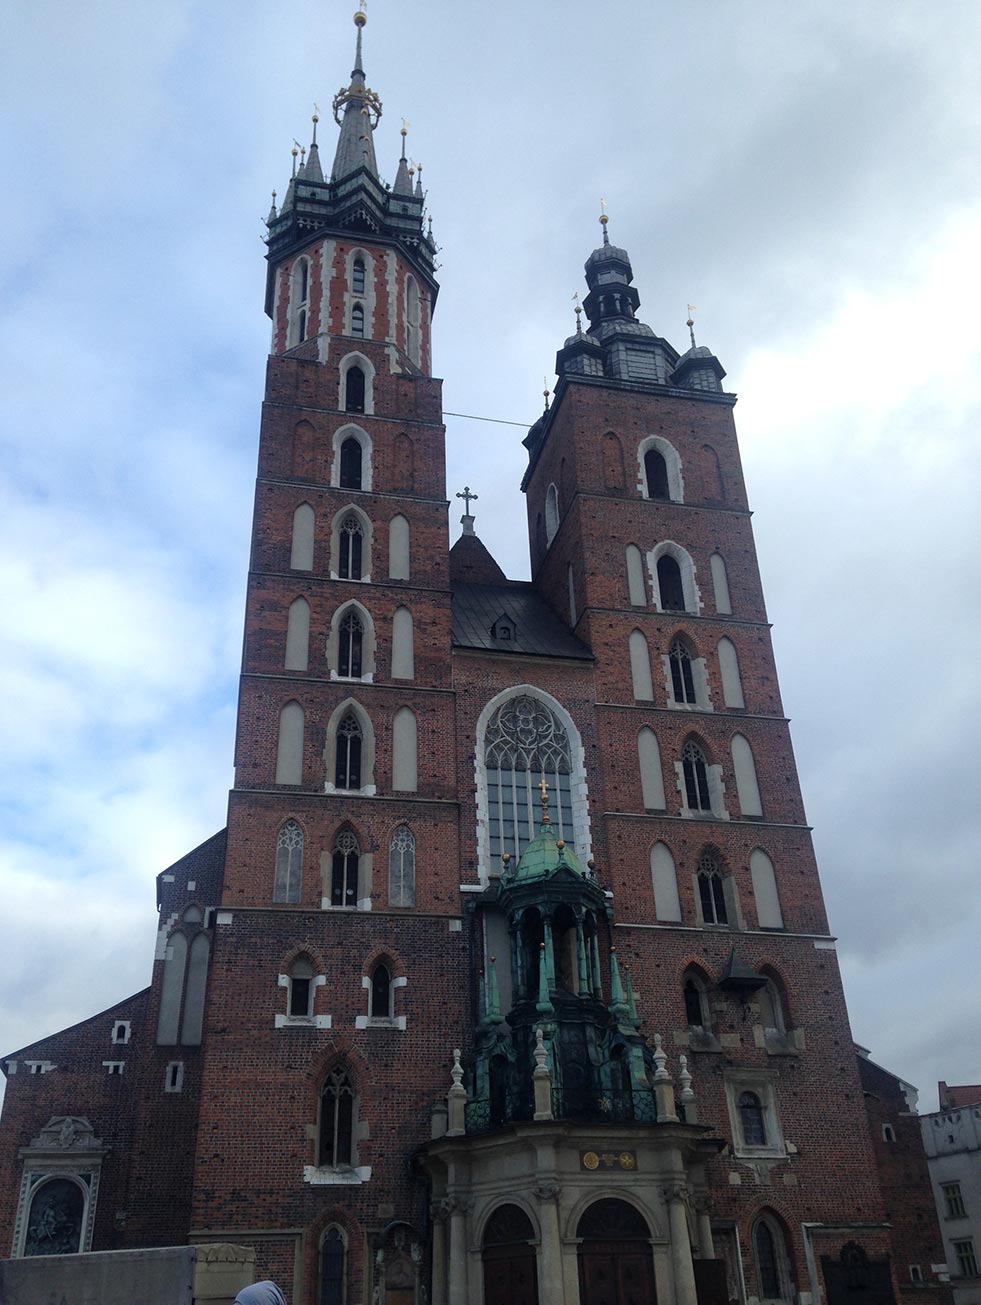 The towers of a brick church in Krakow, Poland.